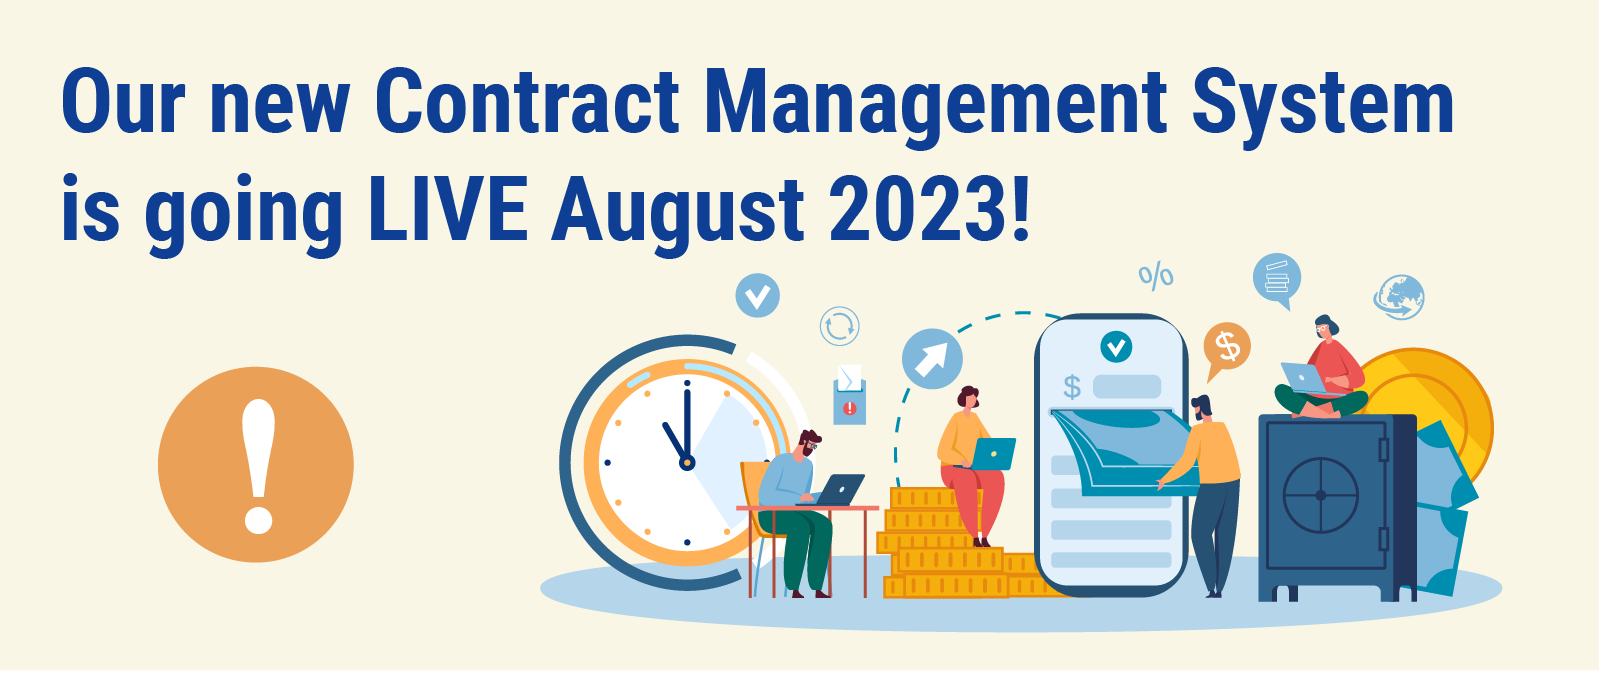 Our new Contract Management System is going LIVE August 2023!